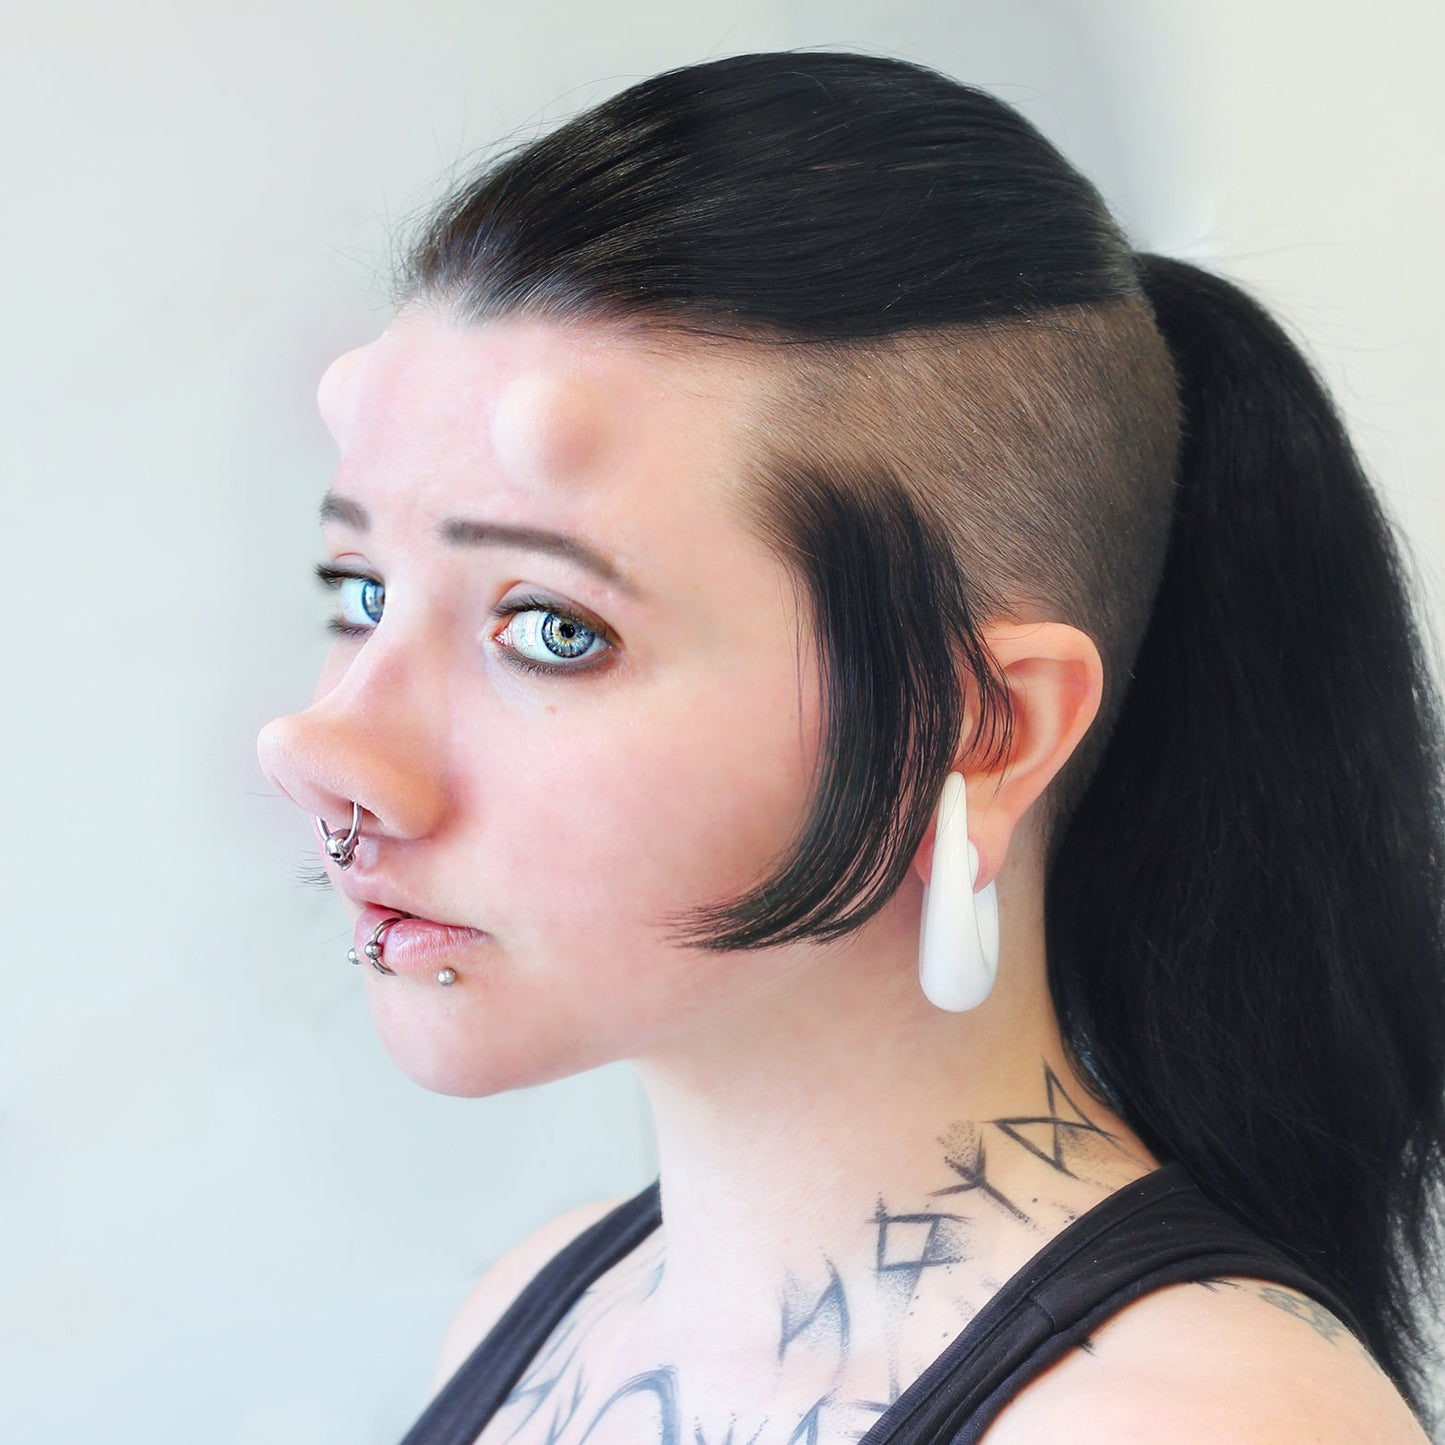 Woman with black hair wearing subdermal horns and a piglet nose prosthetic